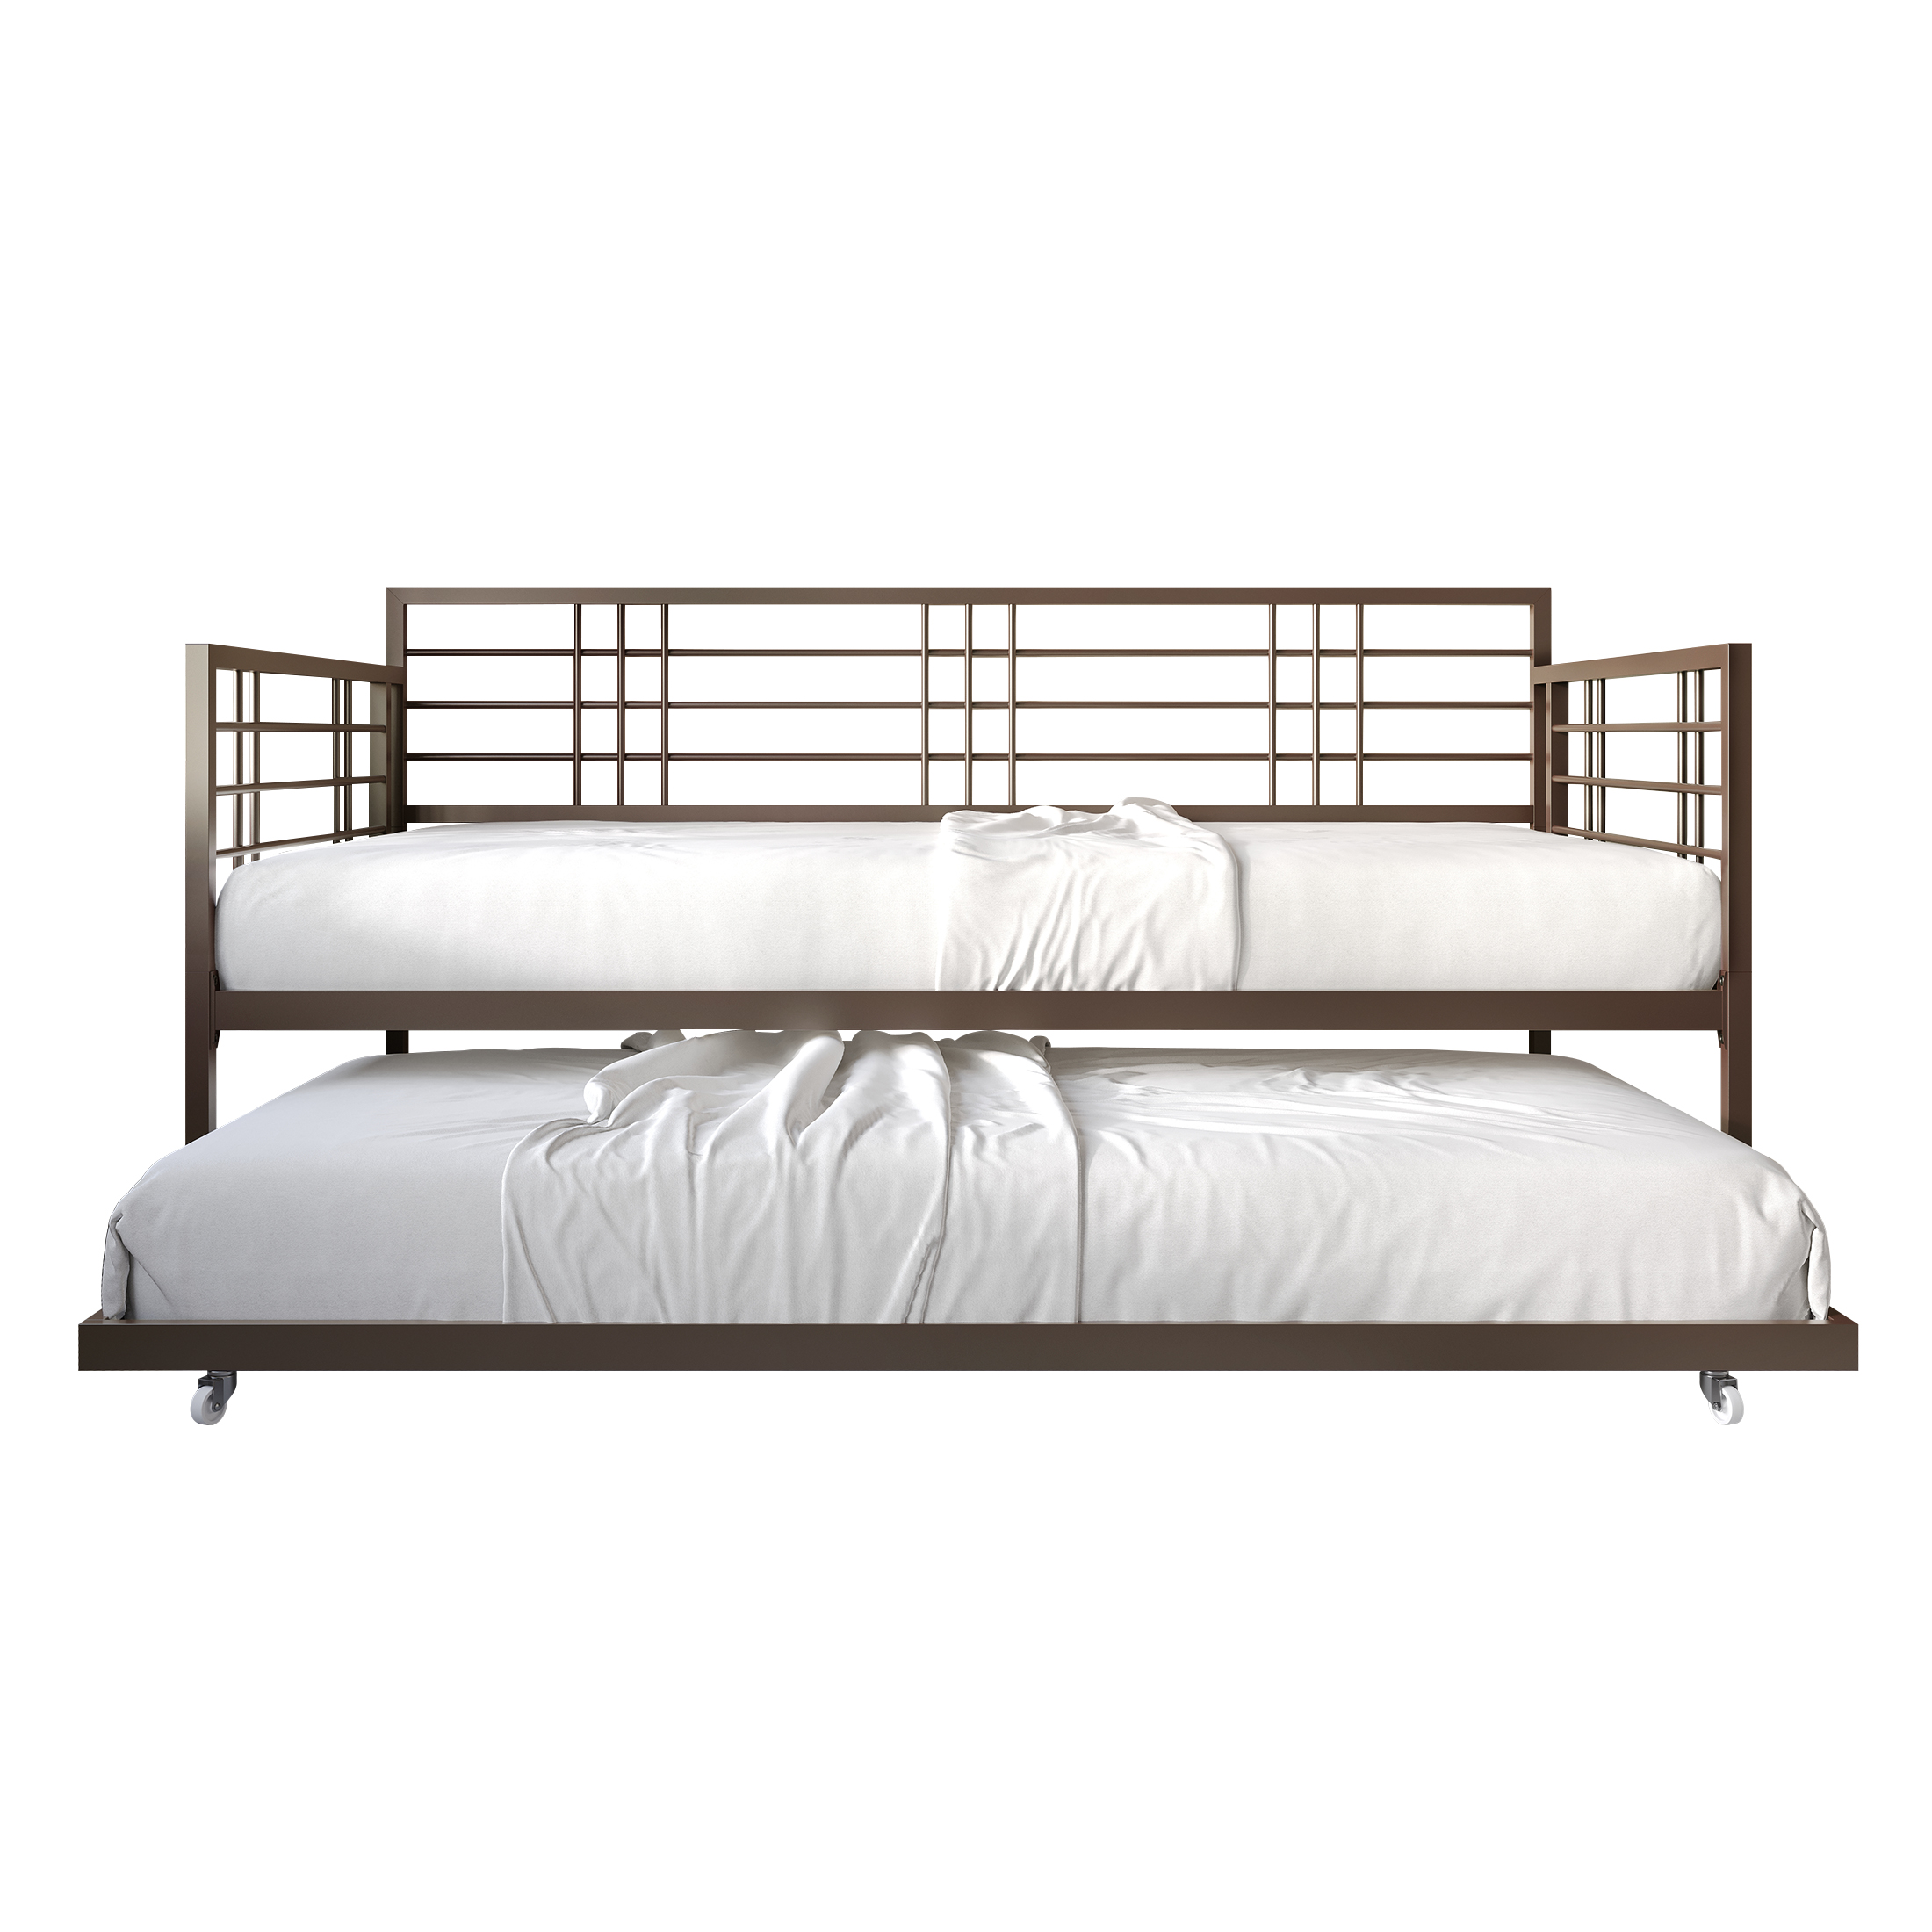 Castle Place Elegance Twin Size Metal Daybed with Trundle, Brown - image 3 of 7